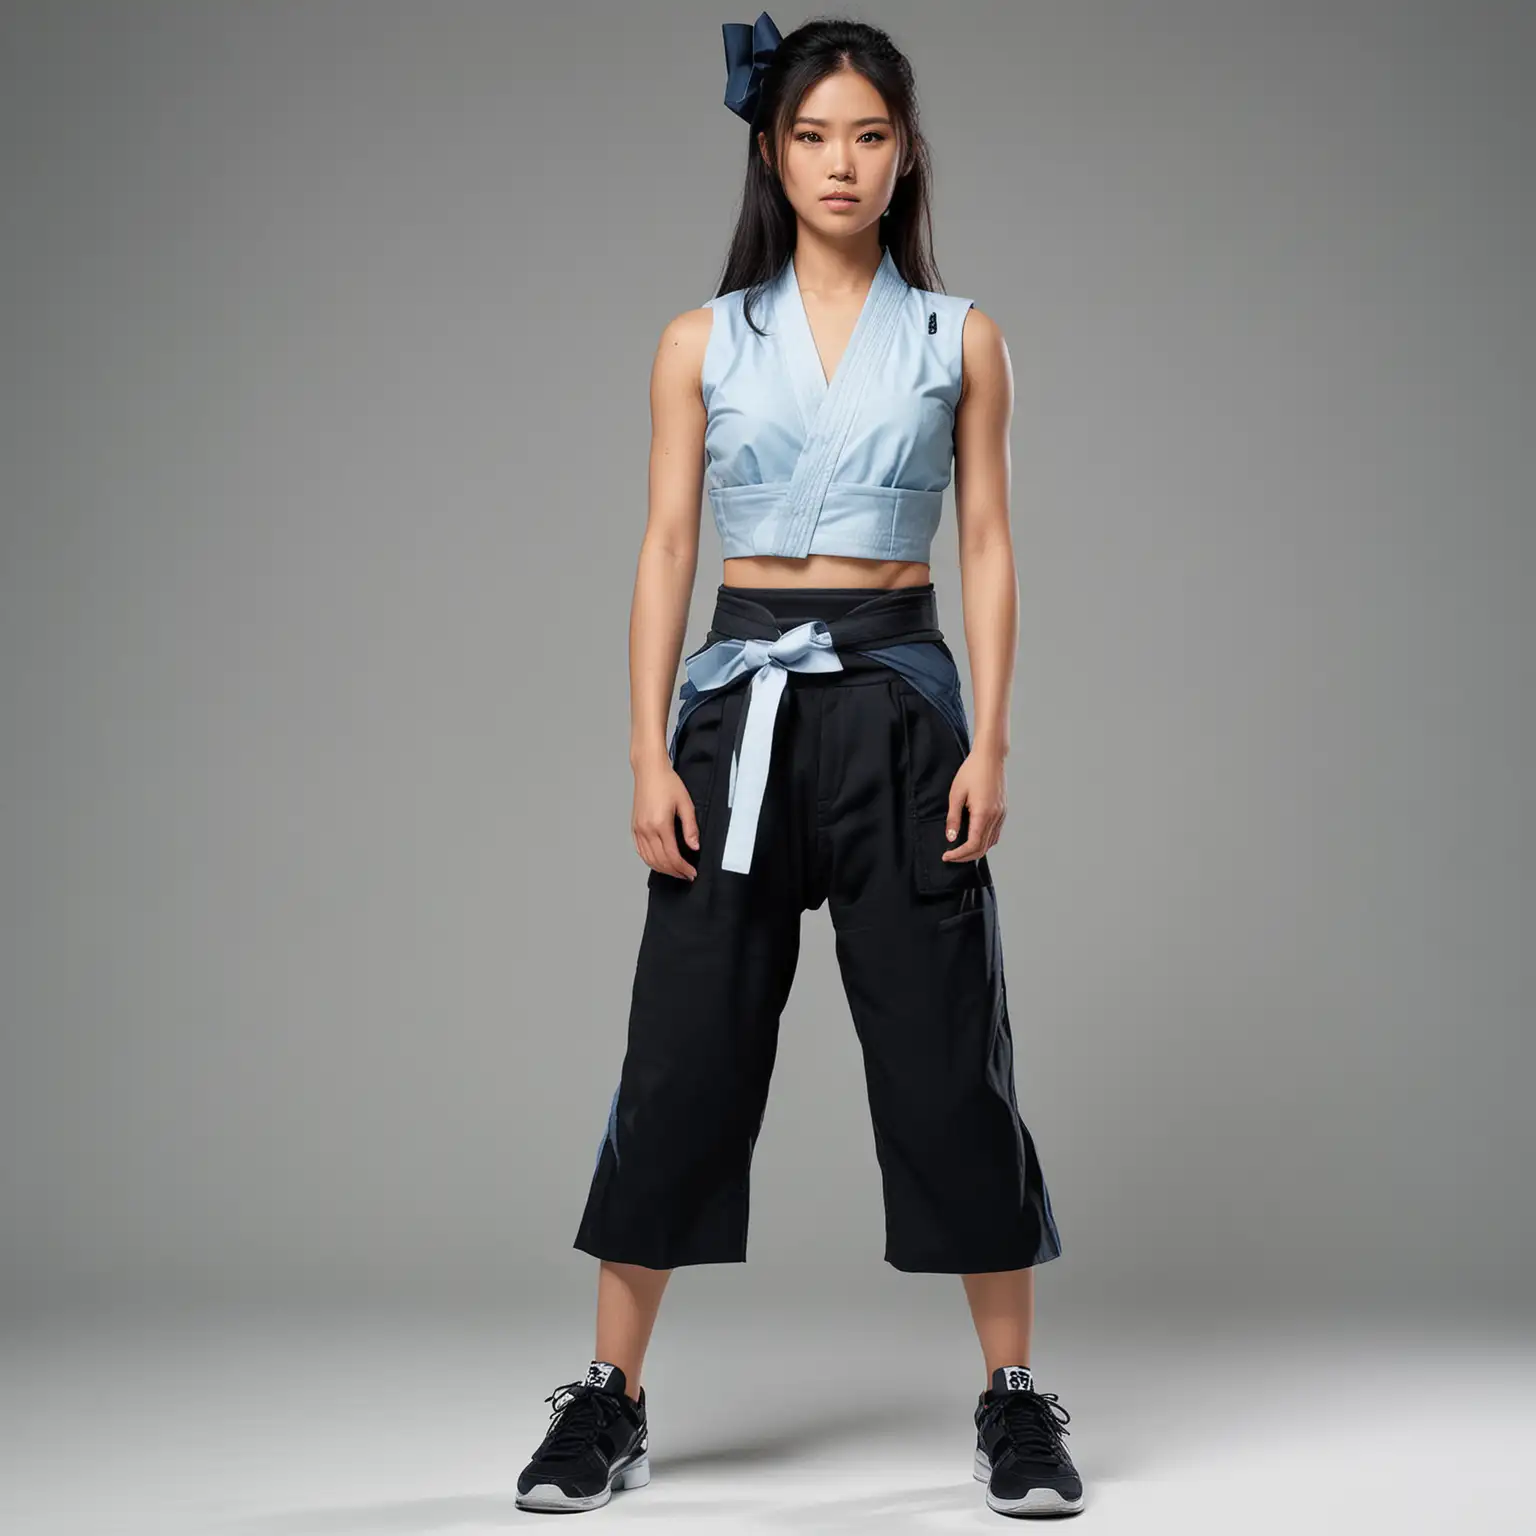 Standing full body view, strong toned beautiful Japanese supermodel in sleeveless, light-blue deep-cut croptop karate gi with black accents, black belt with giant bow, high-waisted tight black pants, black sneakers, sneakers, white background